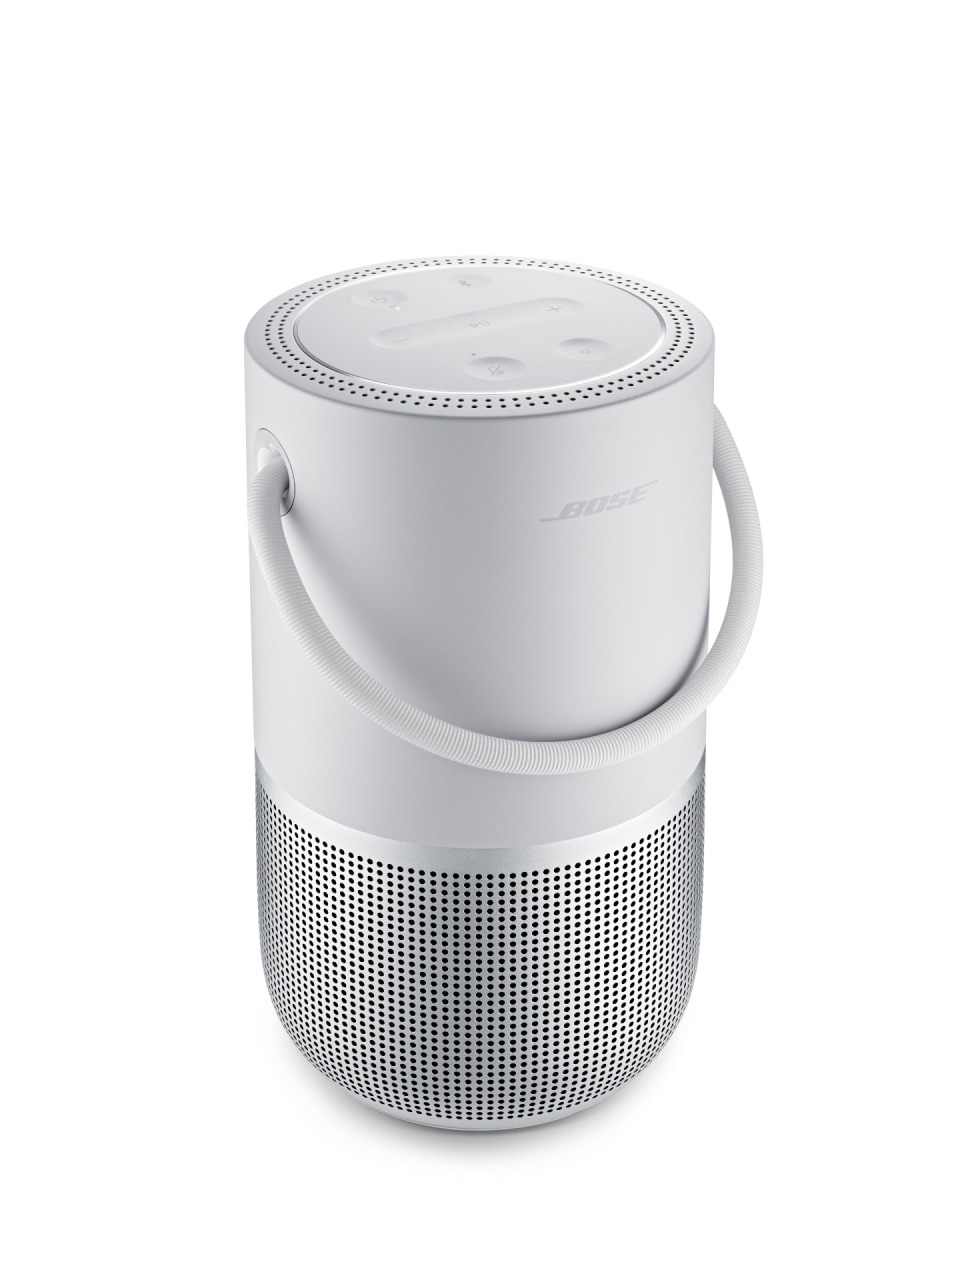 Bose Portable Home Speaker with Wi-Fi - Luxe Silver | Dell USA